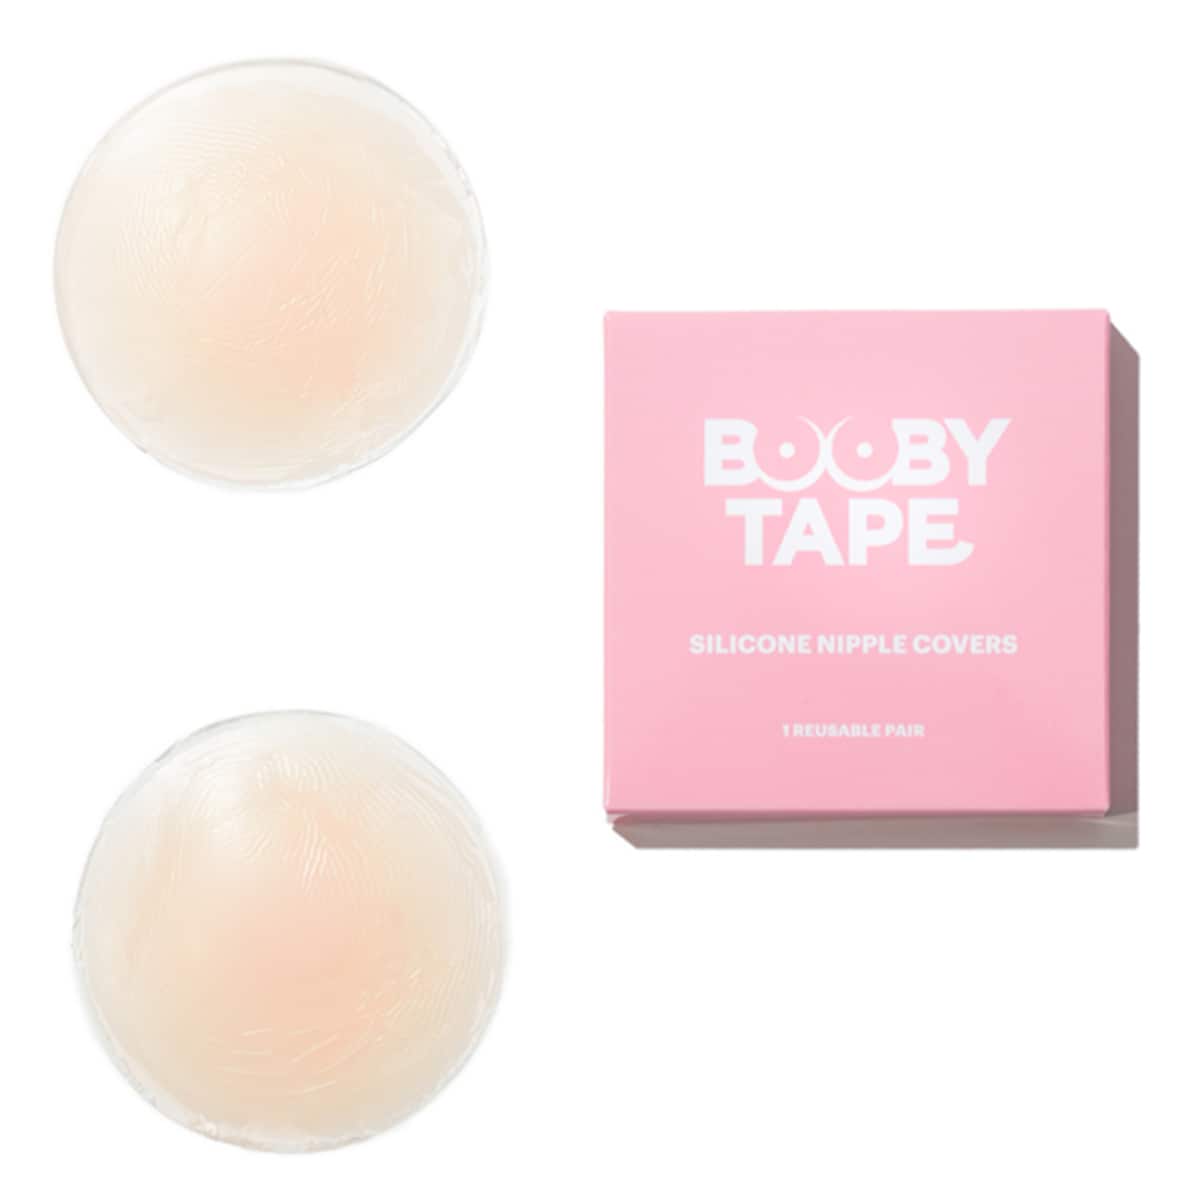 Booby Tape Silicone Nipple Covers 1 Reusable Pair